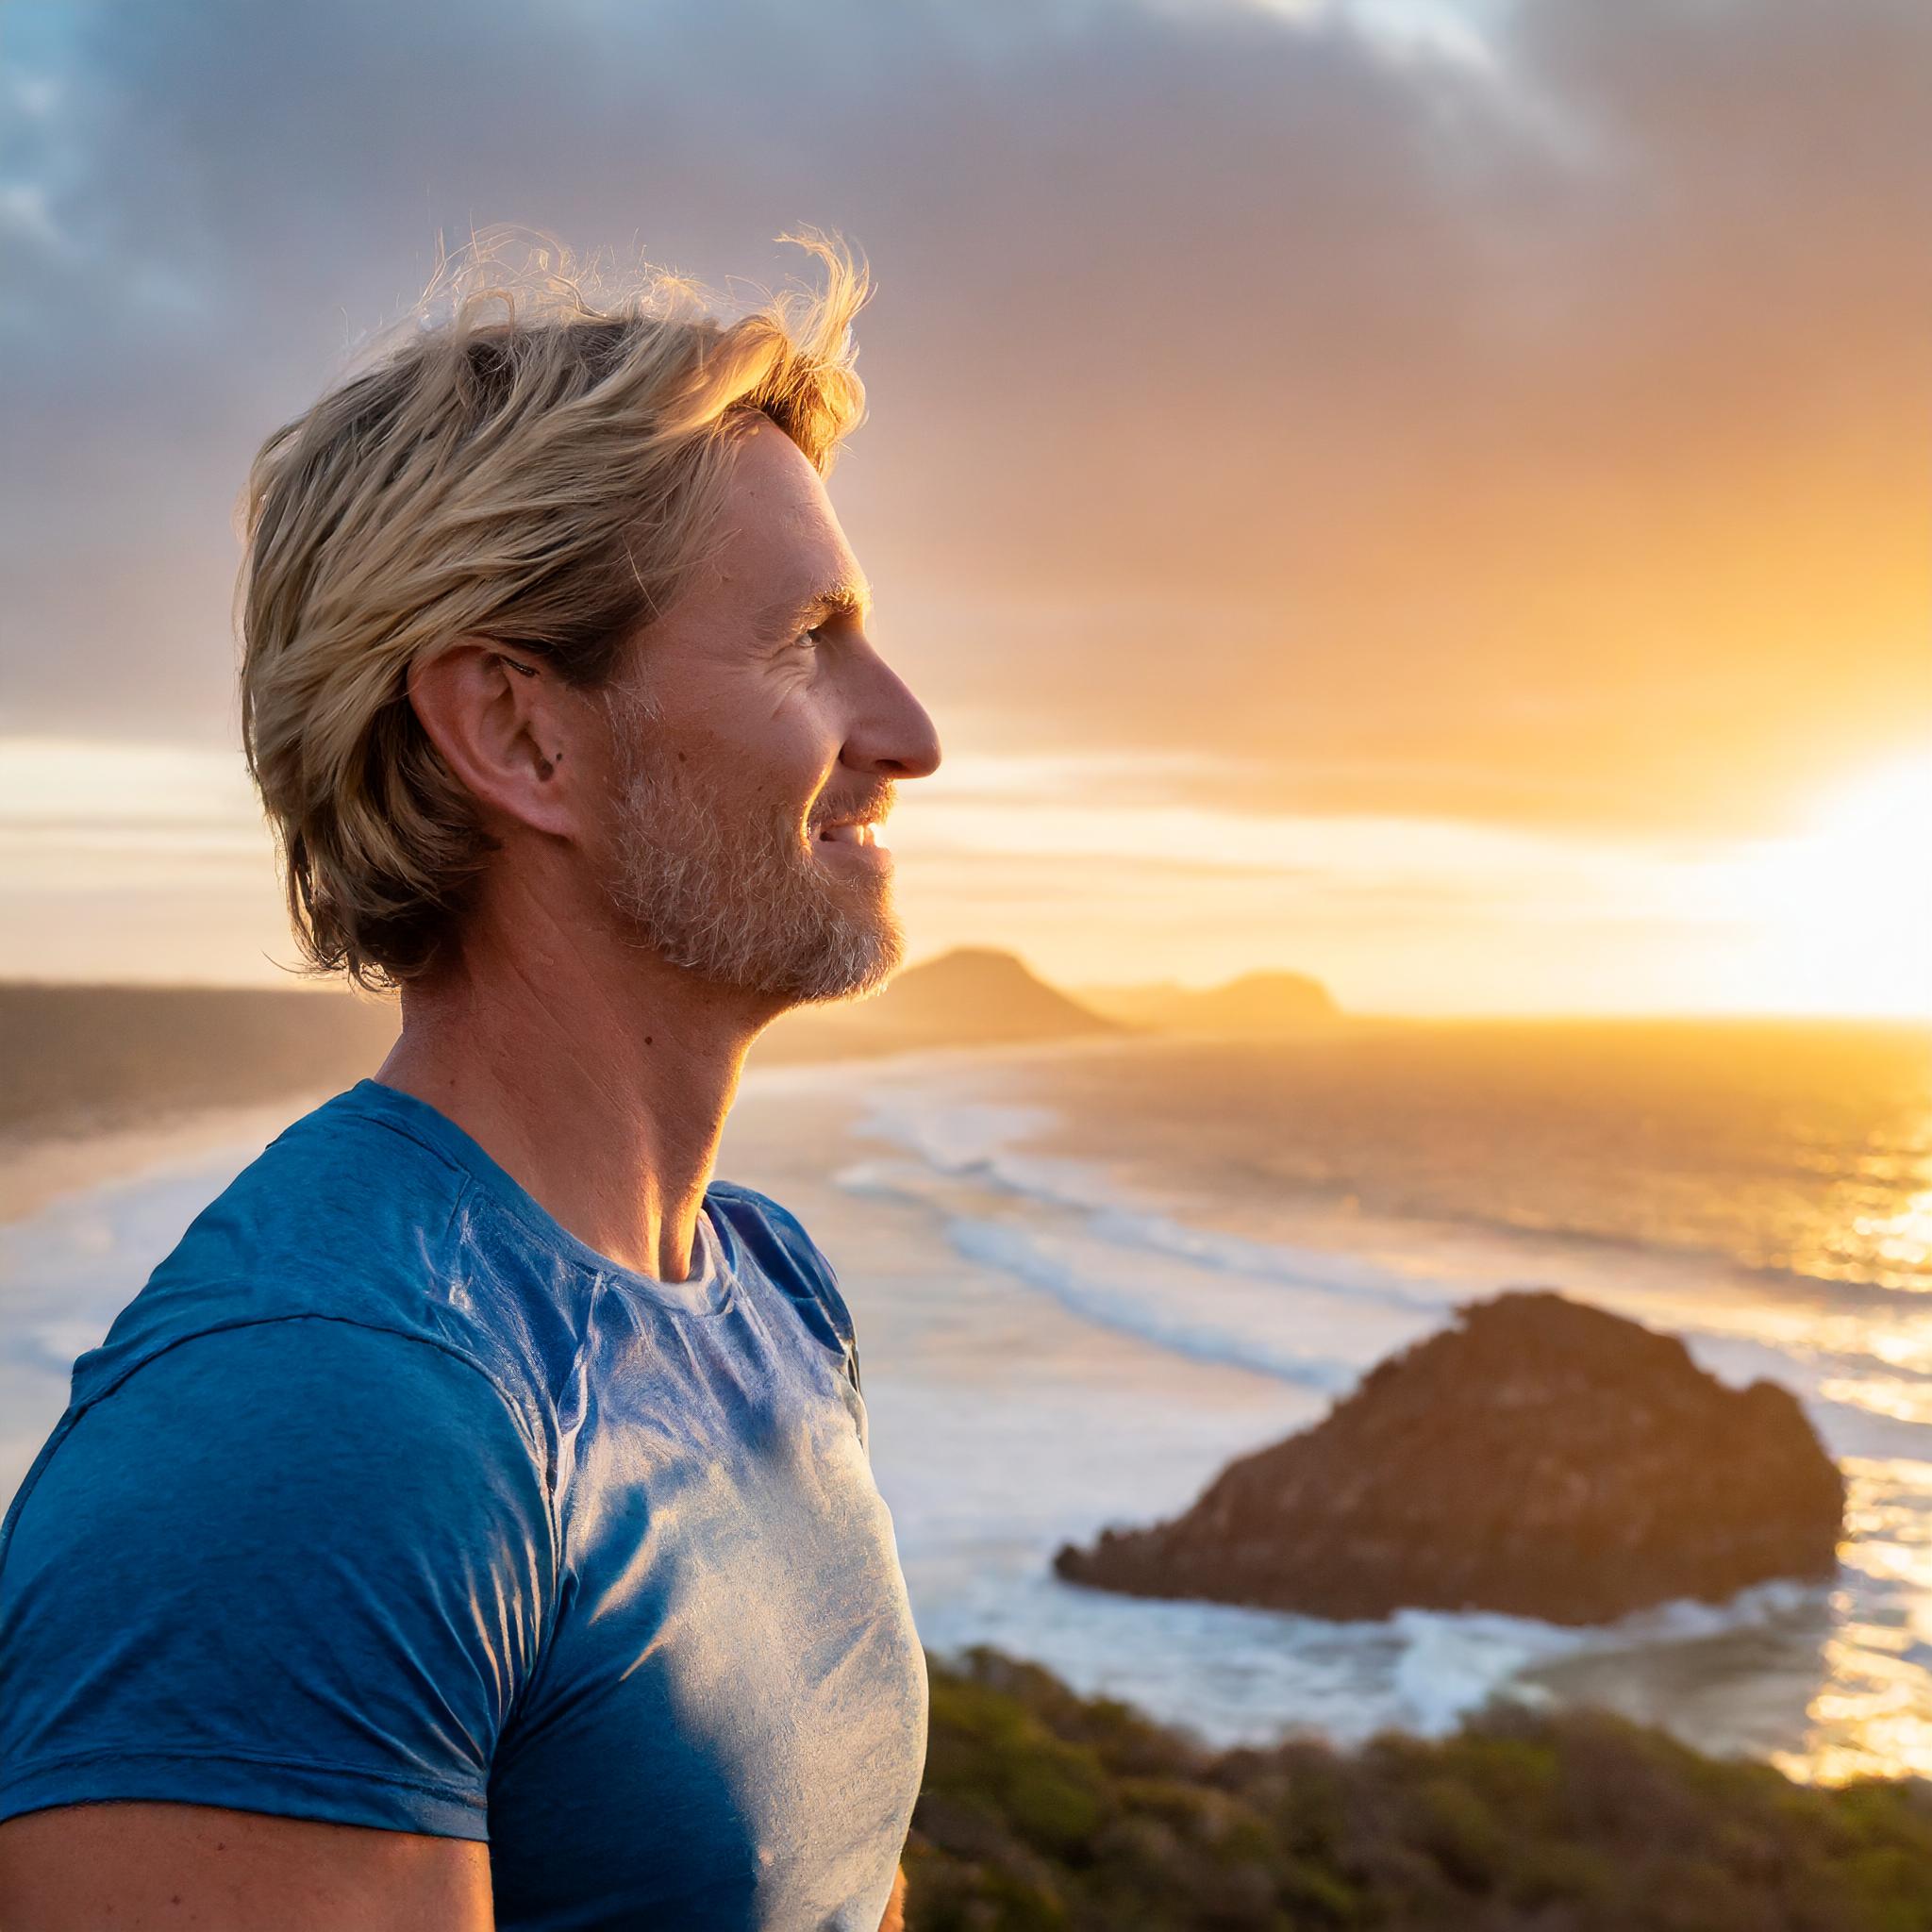 Middle-aged man with short blond hair and stubble, in great physical shape, looking over the ocean during sunset